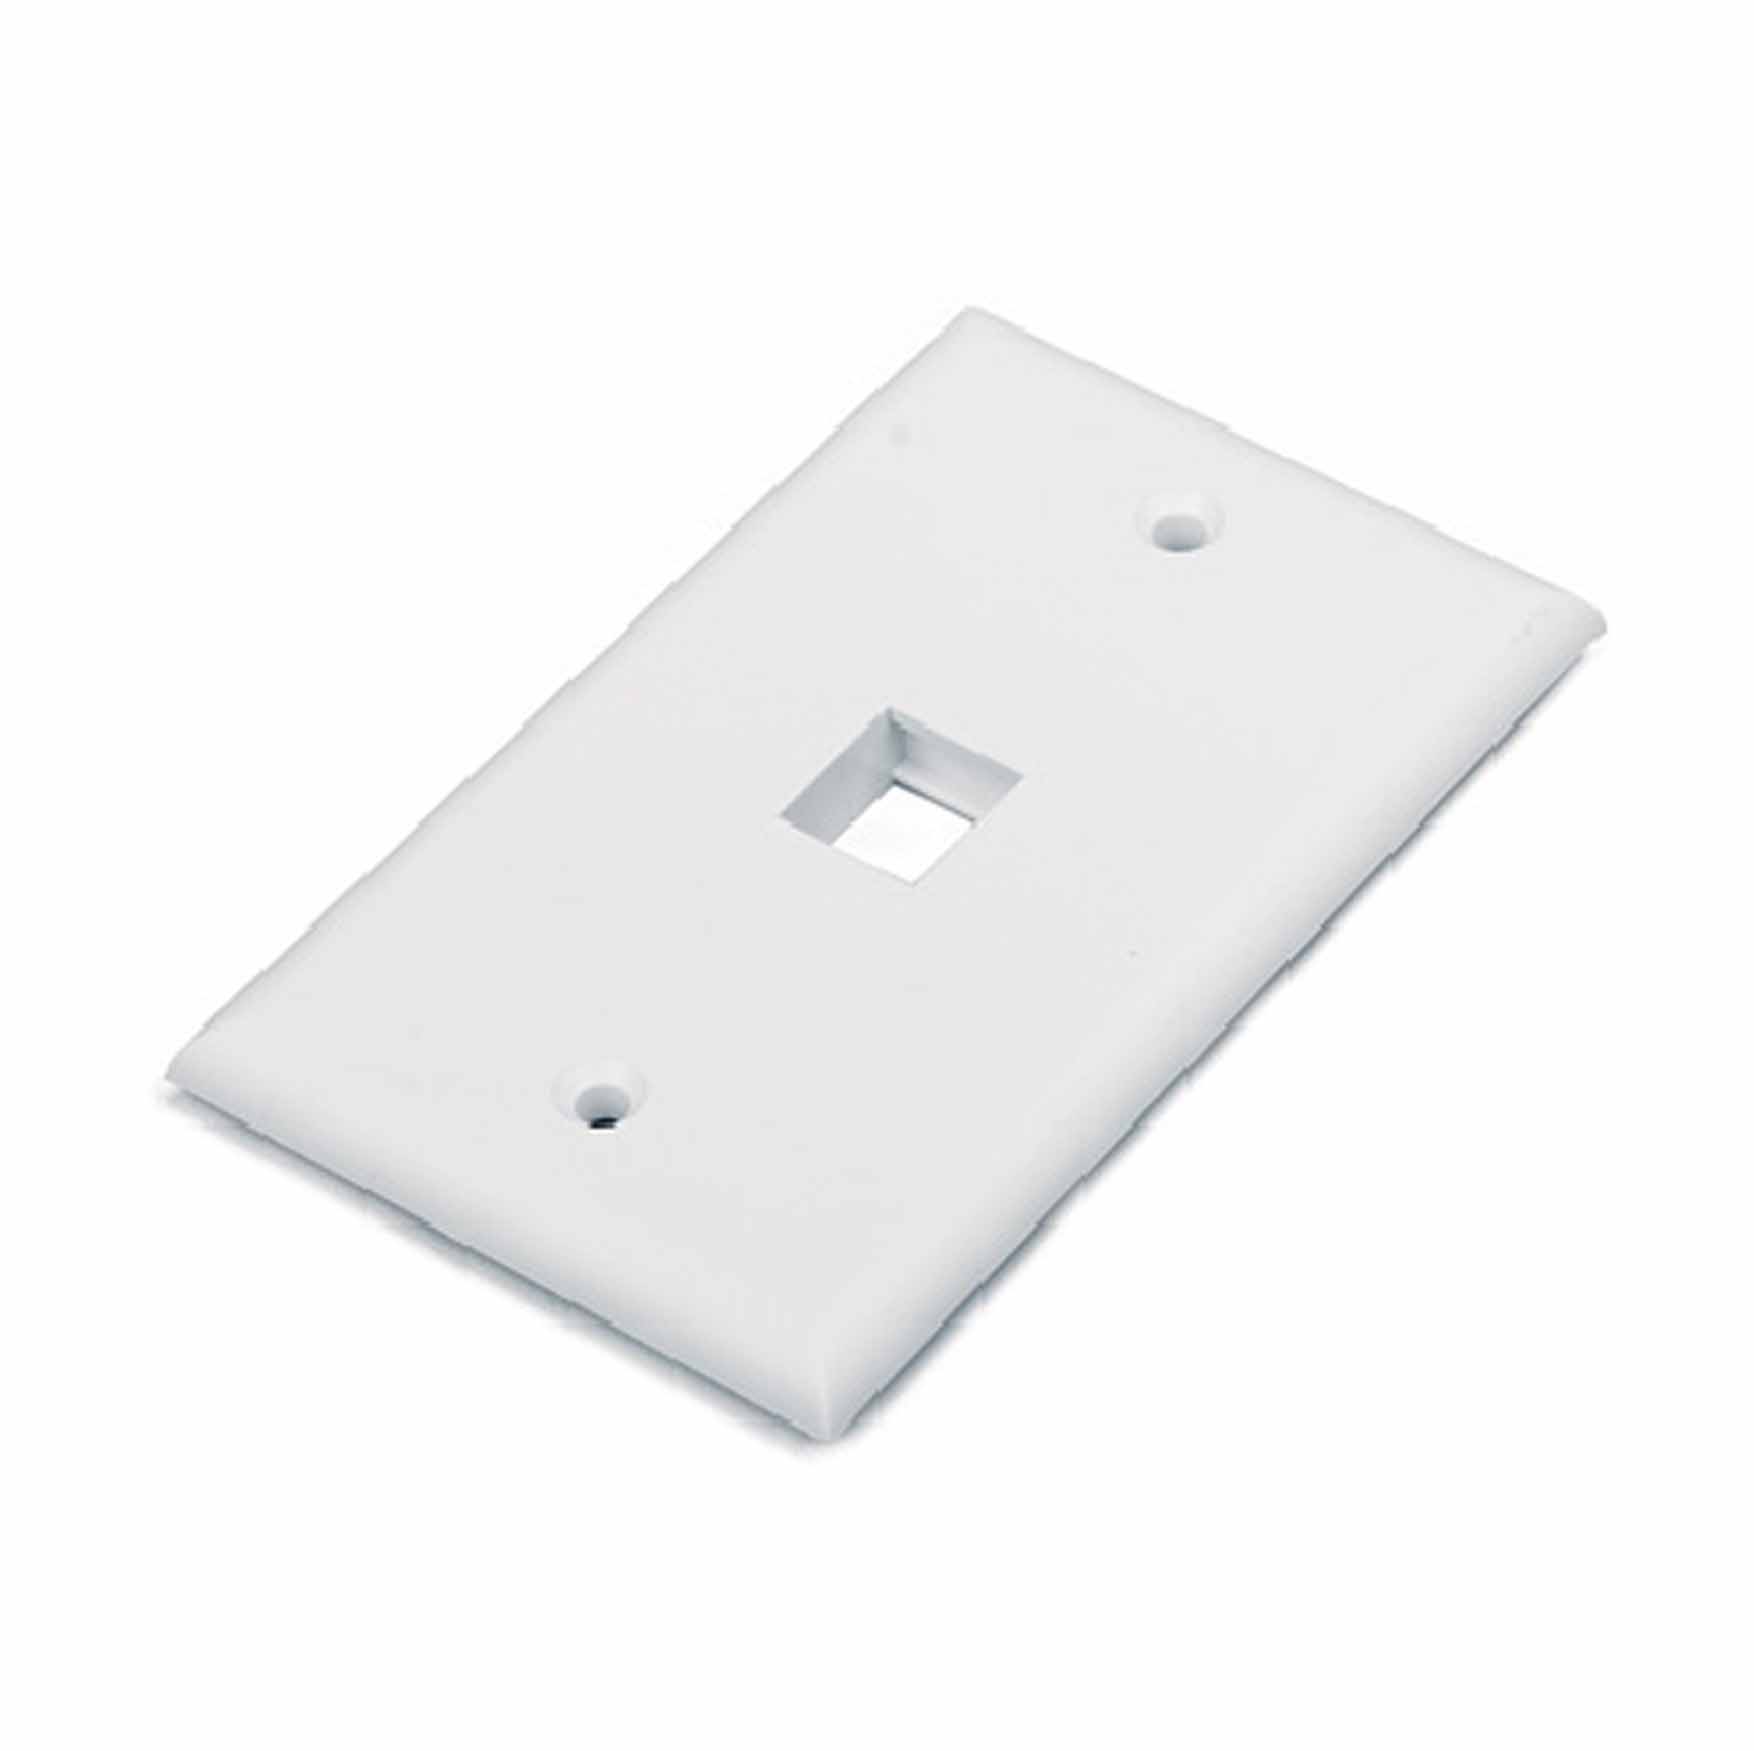 Infinique 1 Port Anti-Bacterial Flat Face Plate